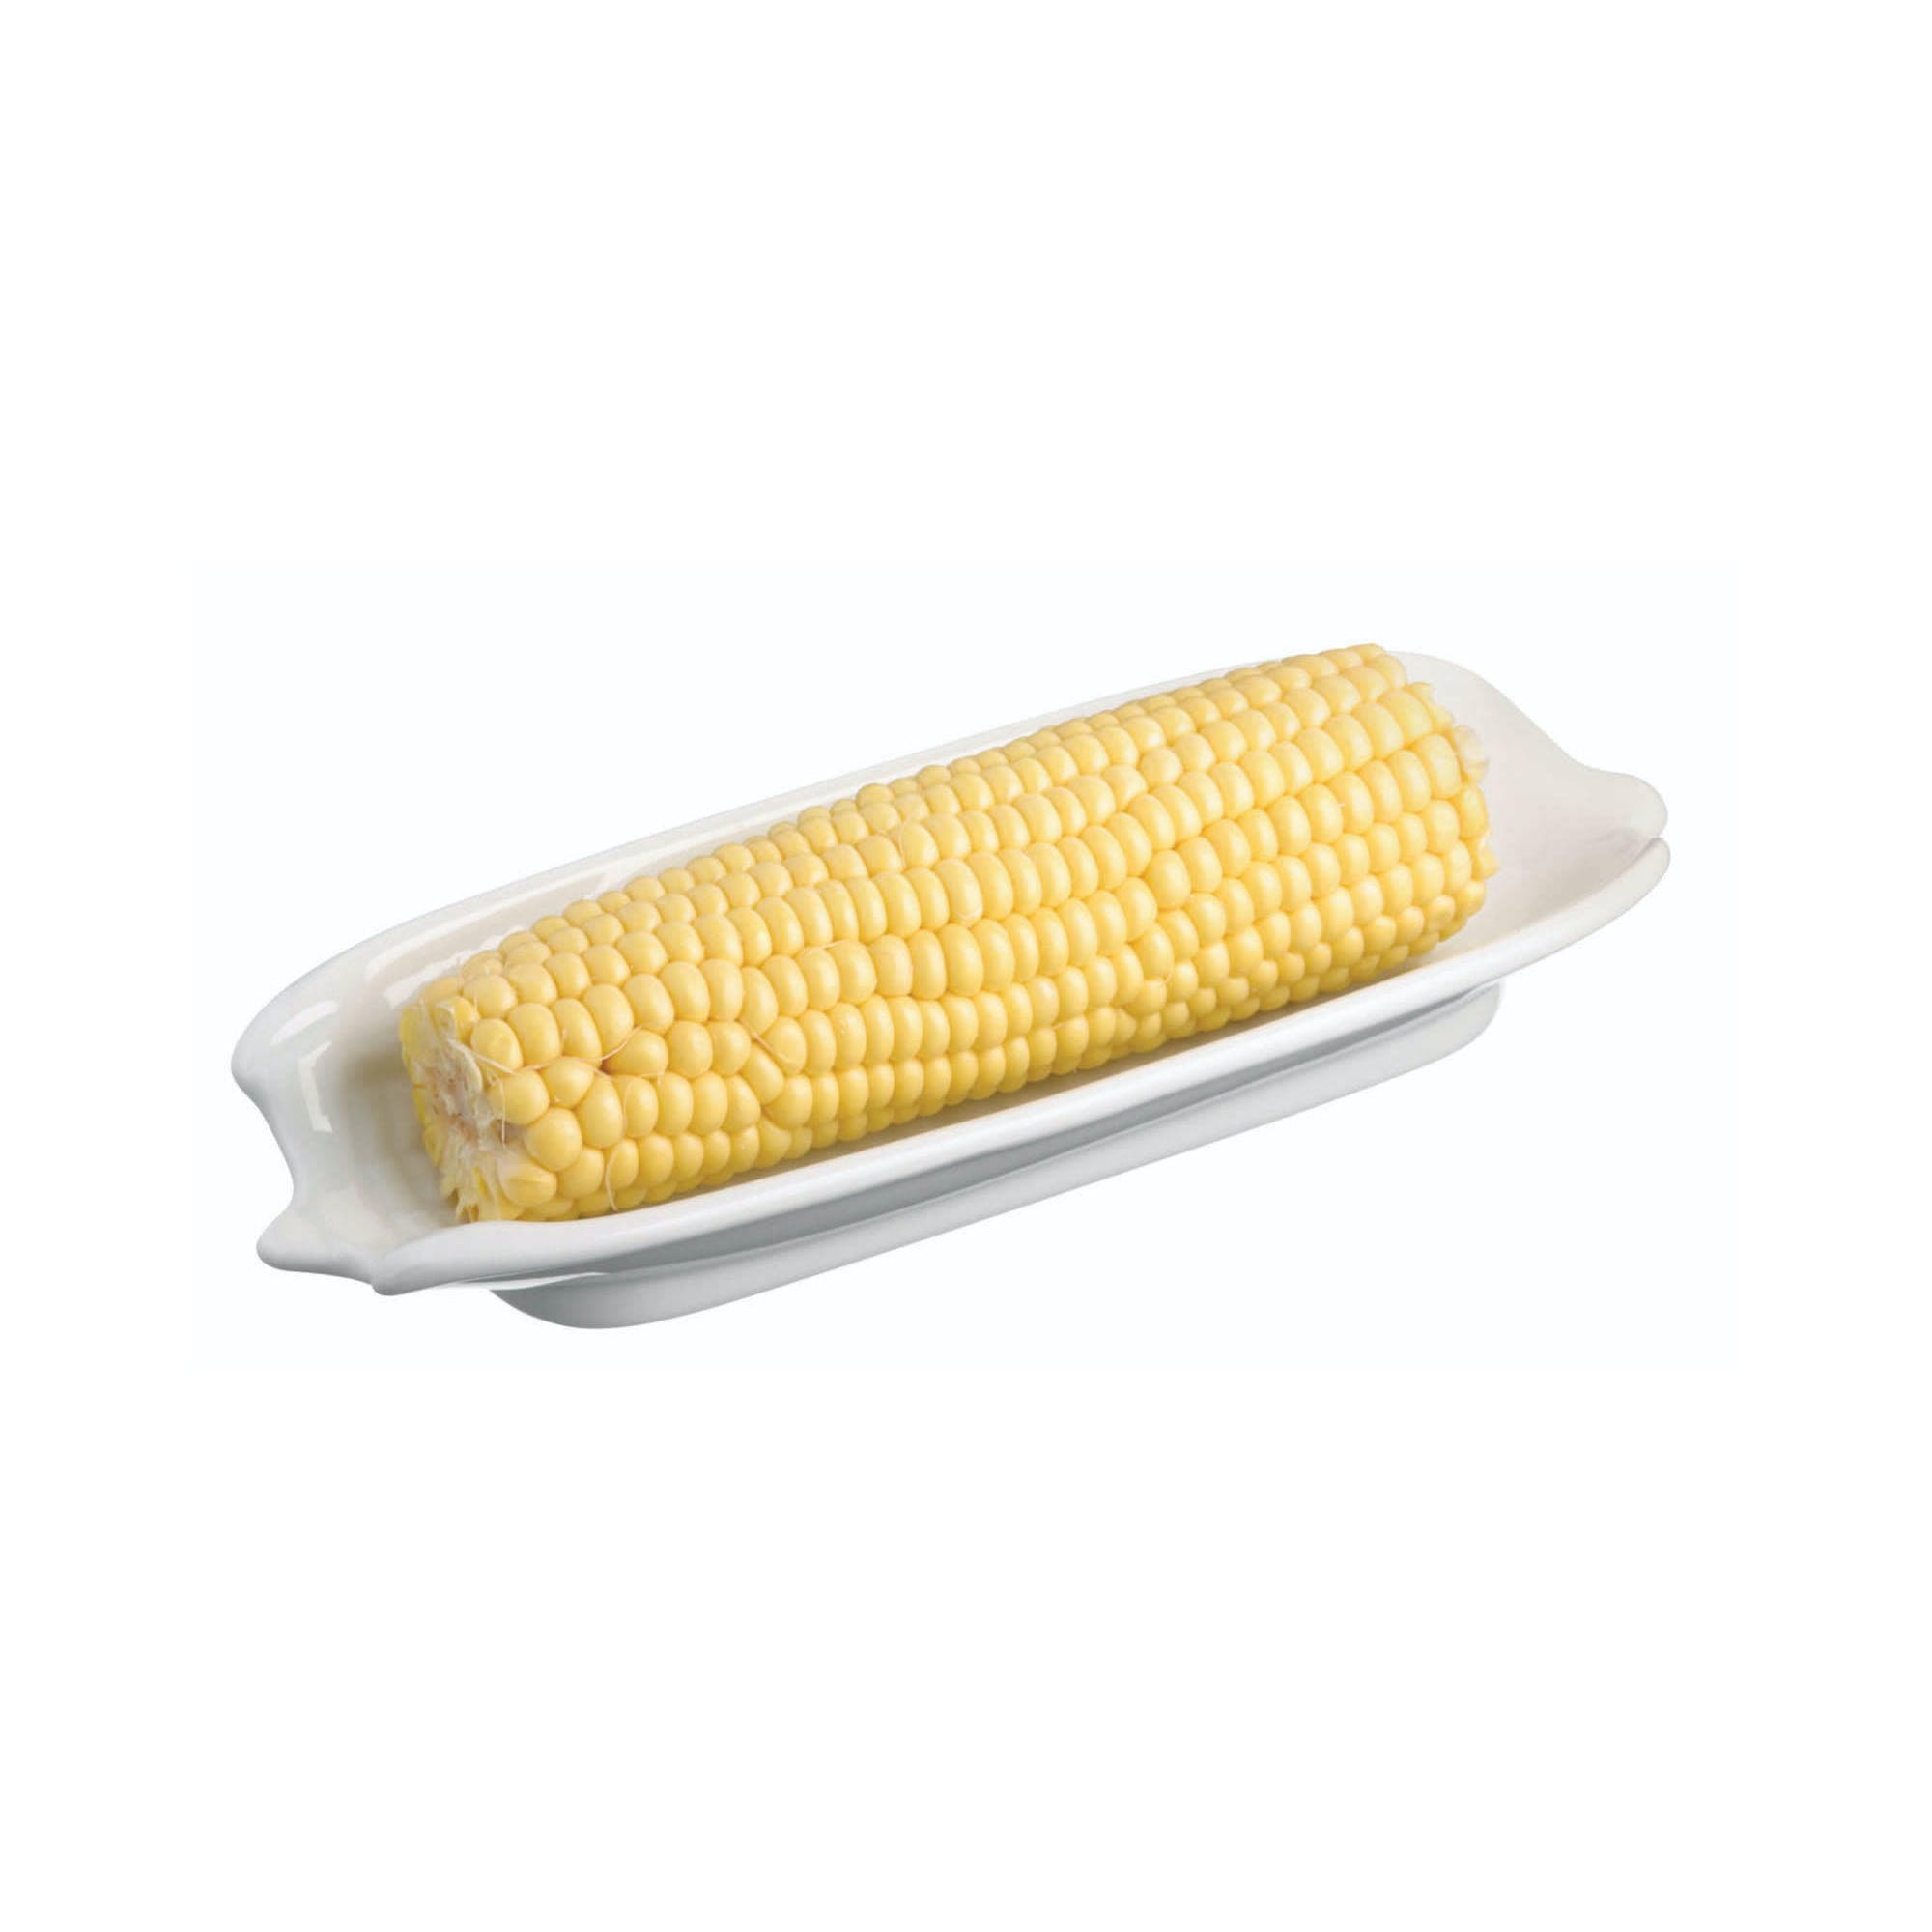 KitchenCraft White Porcelain Corn on the Cob Dish - Kate's Cupboard